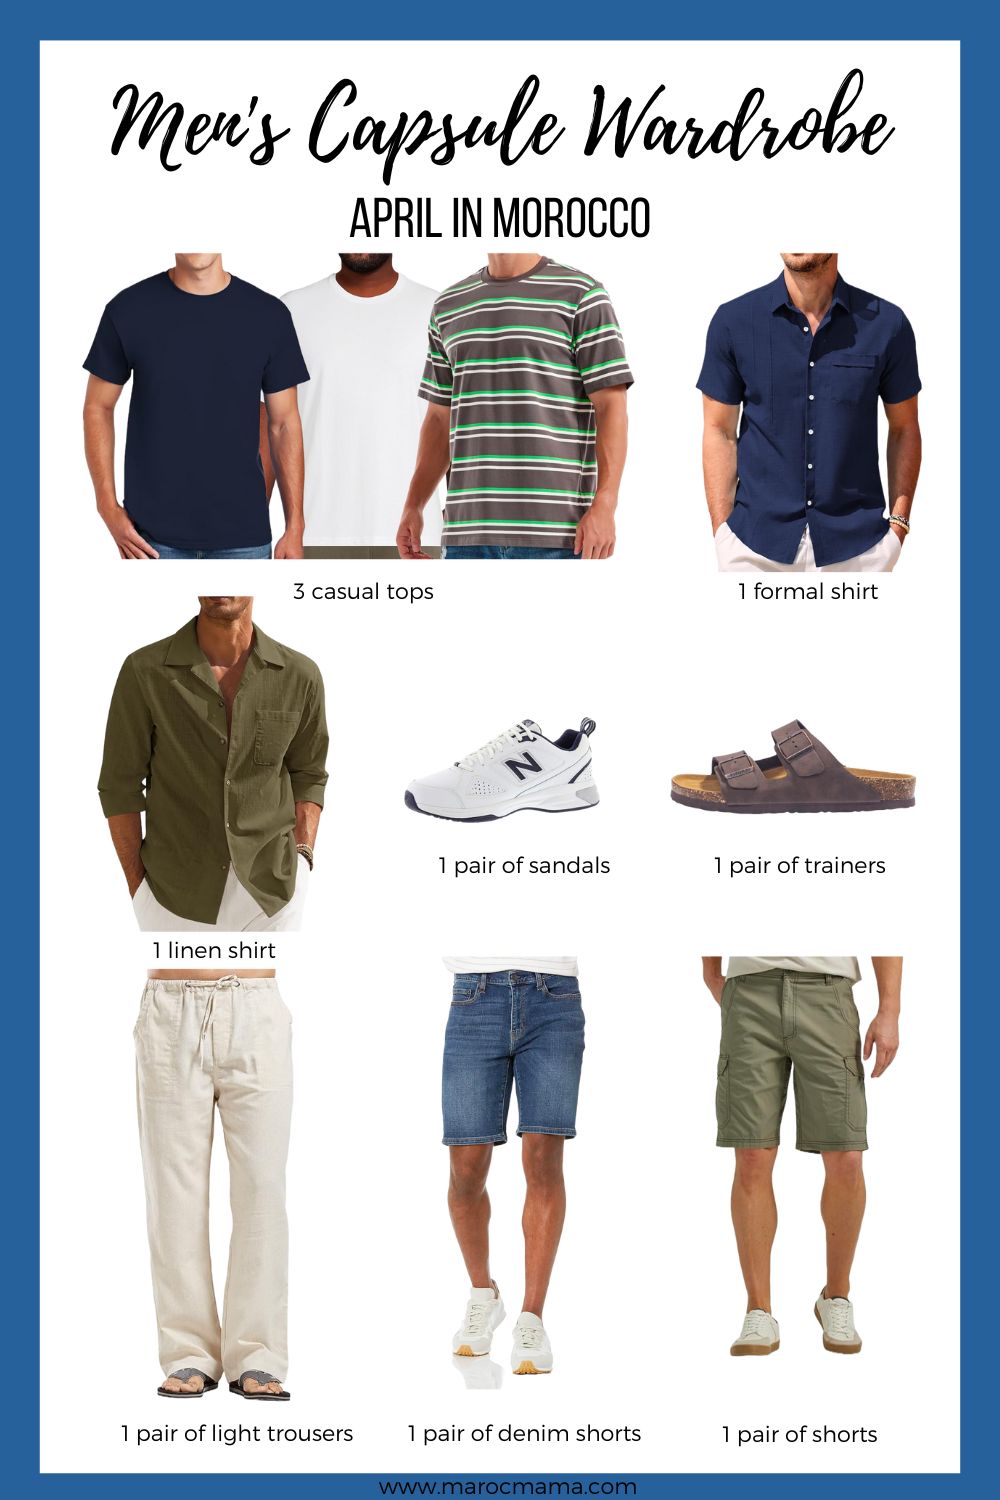 3 casual t-shirts 1 formal top1 pair of light trousers2 other bottoms (skirts/shorts) 1 linen shirt/sun cover to shade you from the sun 1 pair of trainers 1 pair of sandals with the text Men's Capsule Wardrobe, April in Morocco